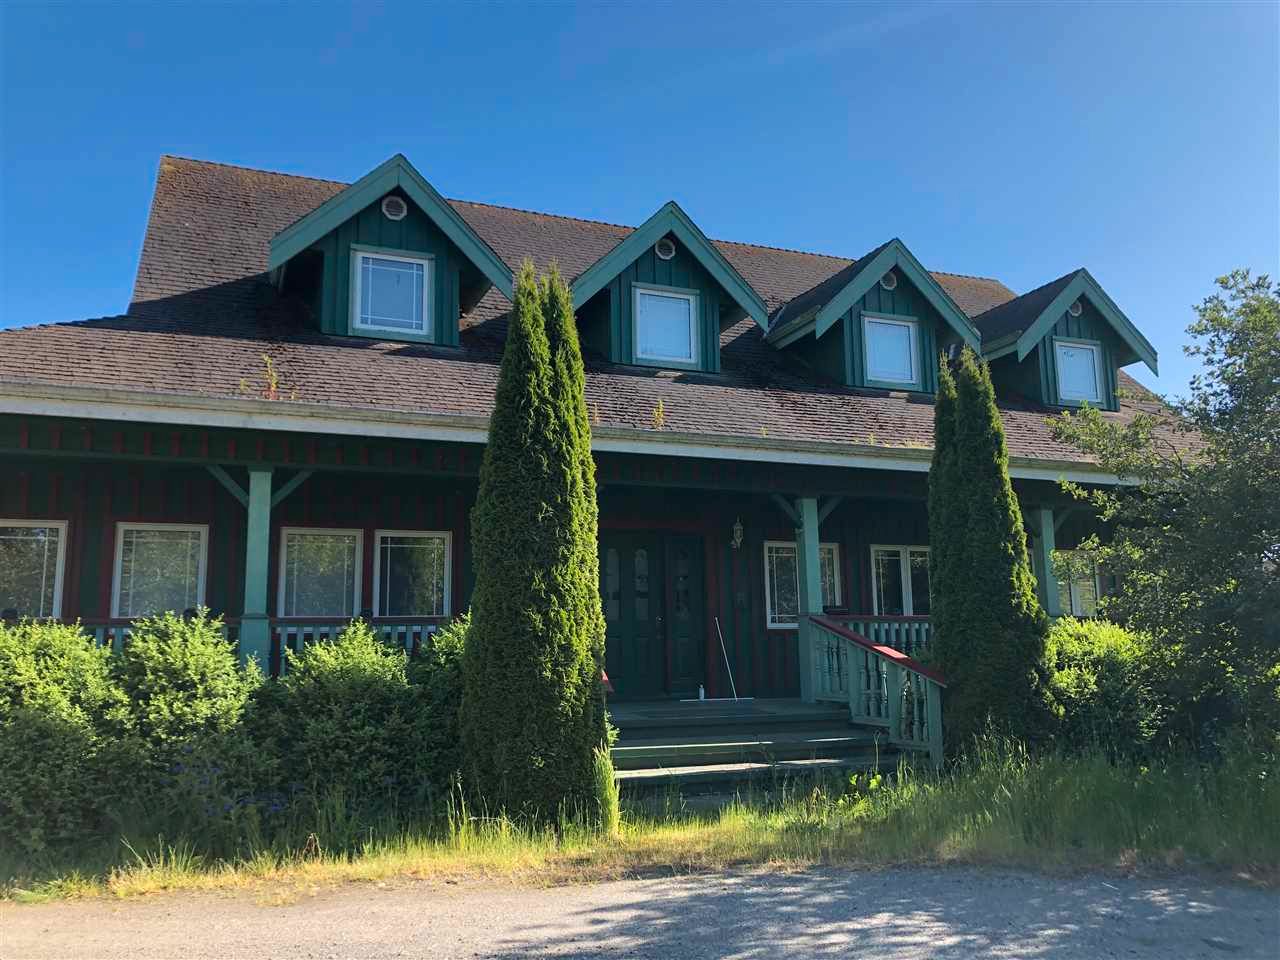 Main Photo: 2170 WESTHAM ISLAND Road in Delta: Westham Island House for sale (Ladner)  : MLS®# R2570837